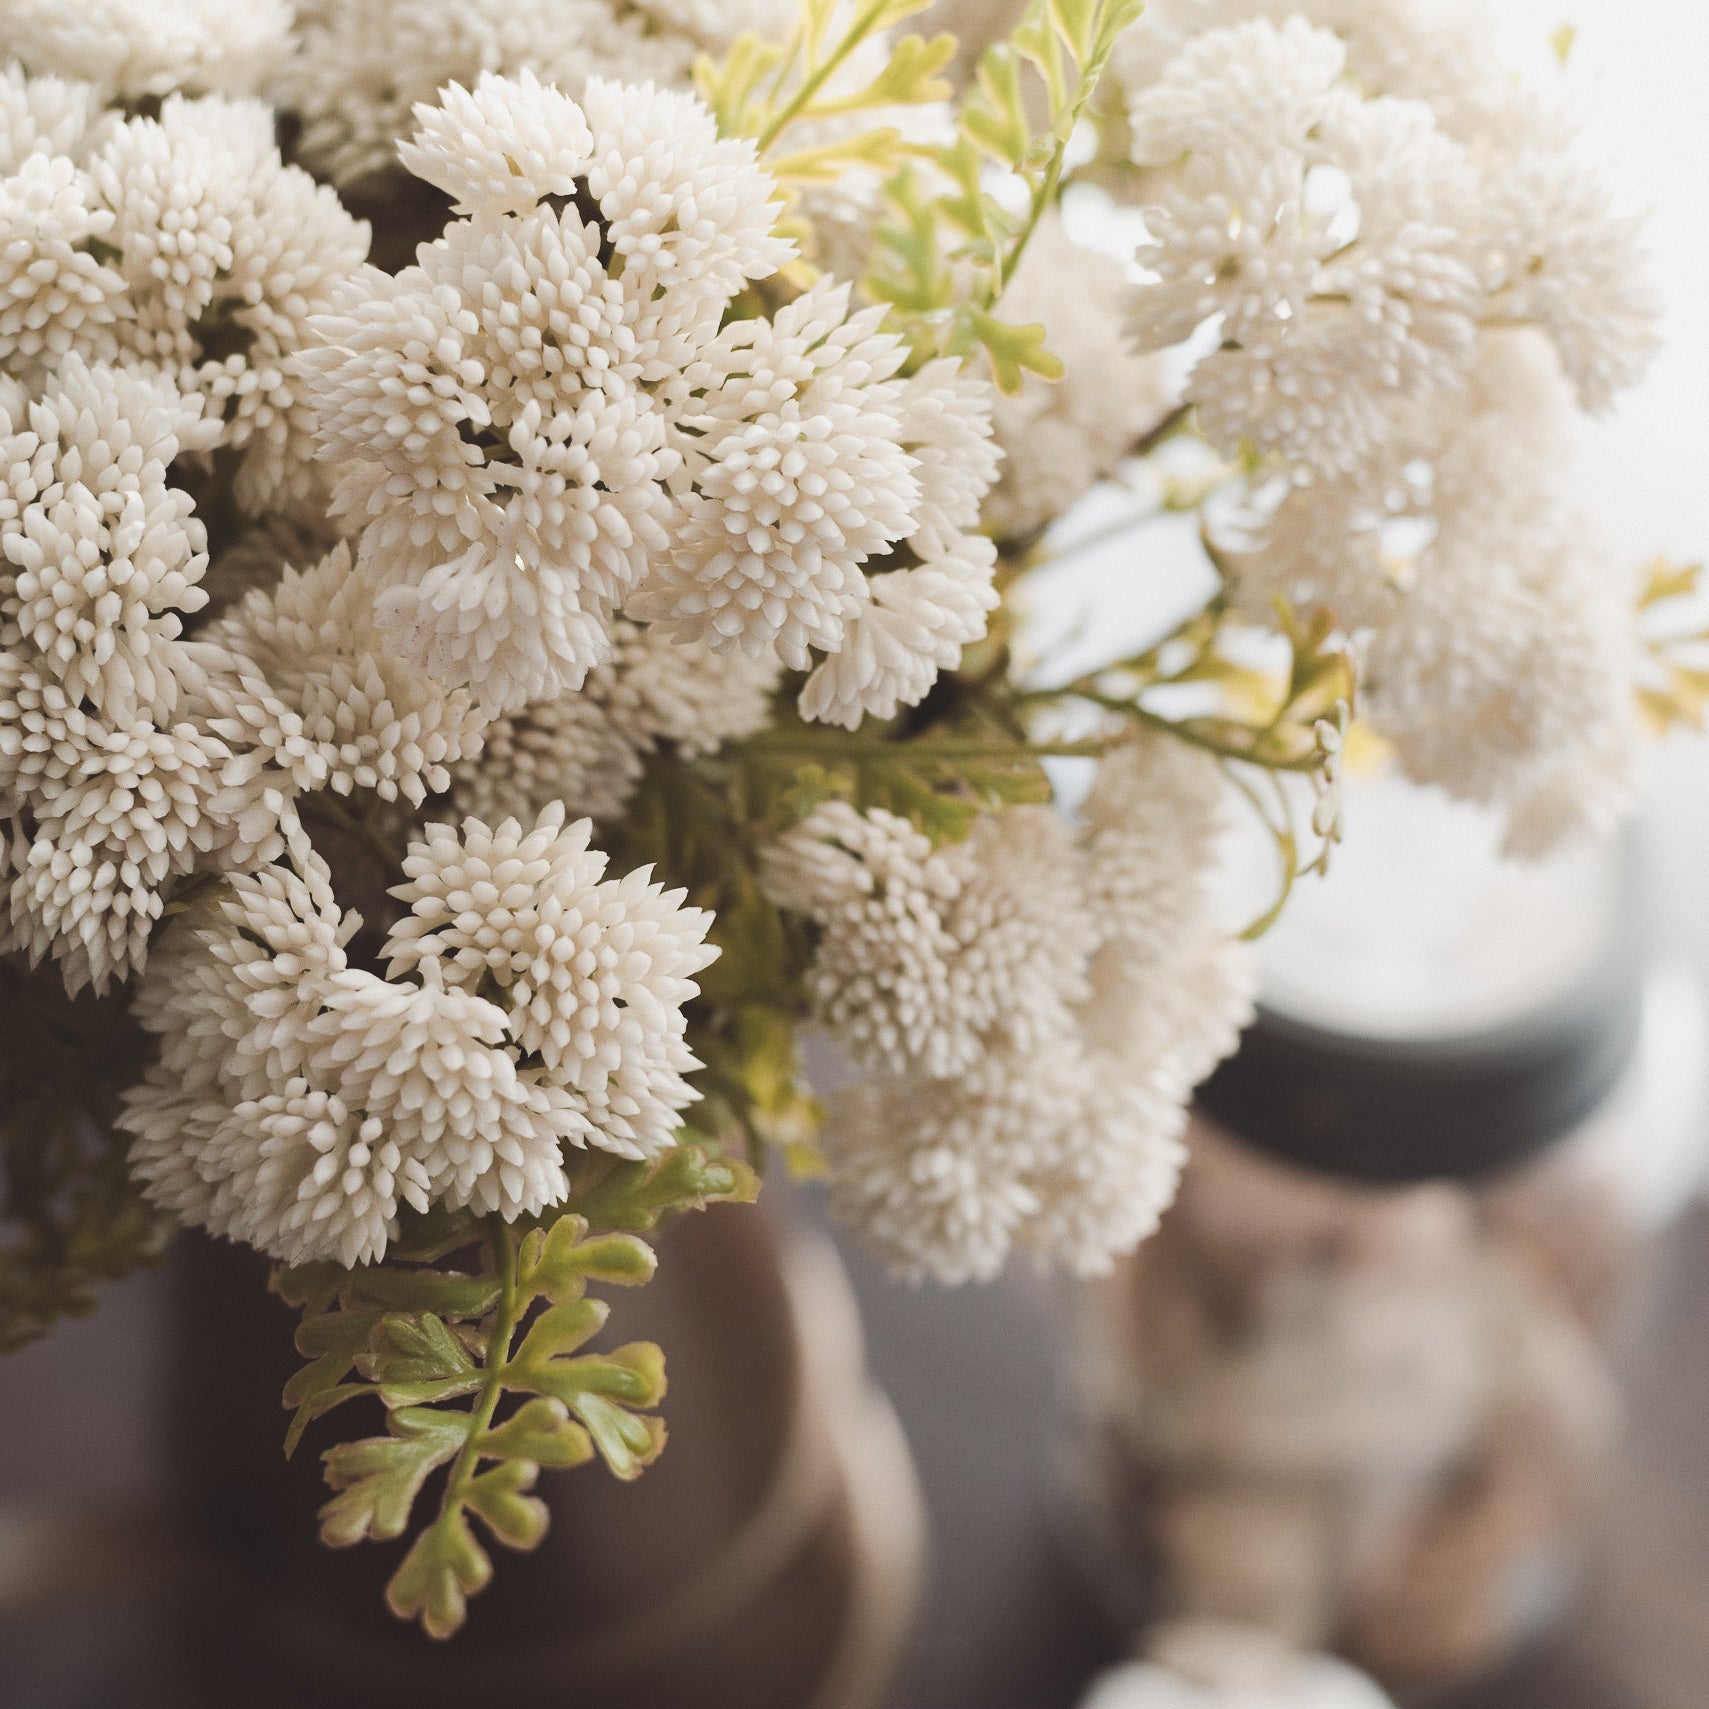 3 Reasons to Buy Faux Flowers